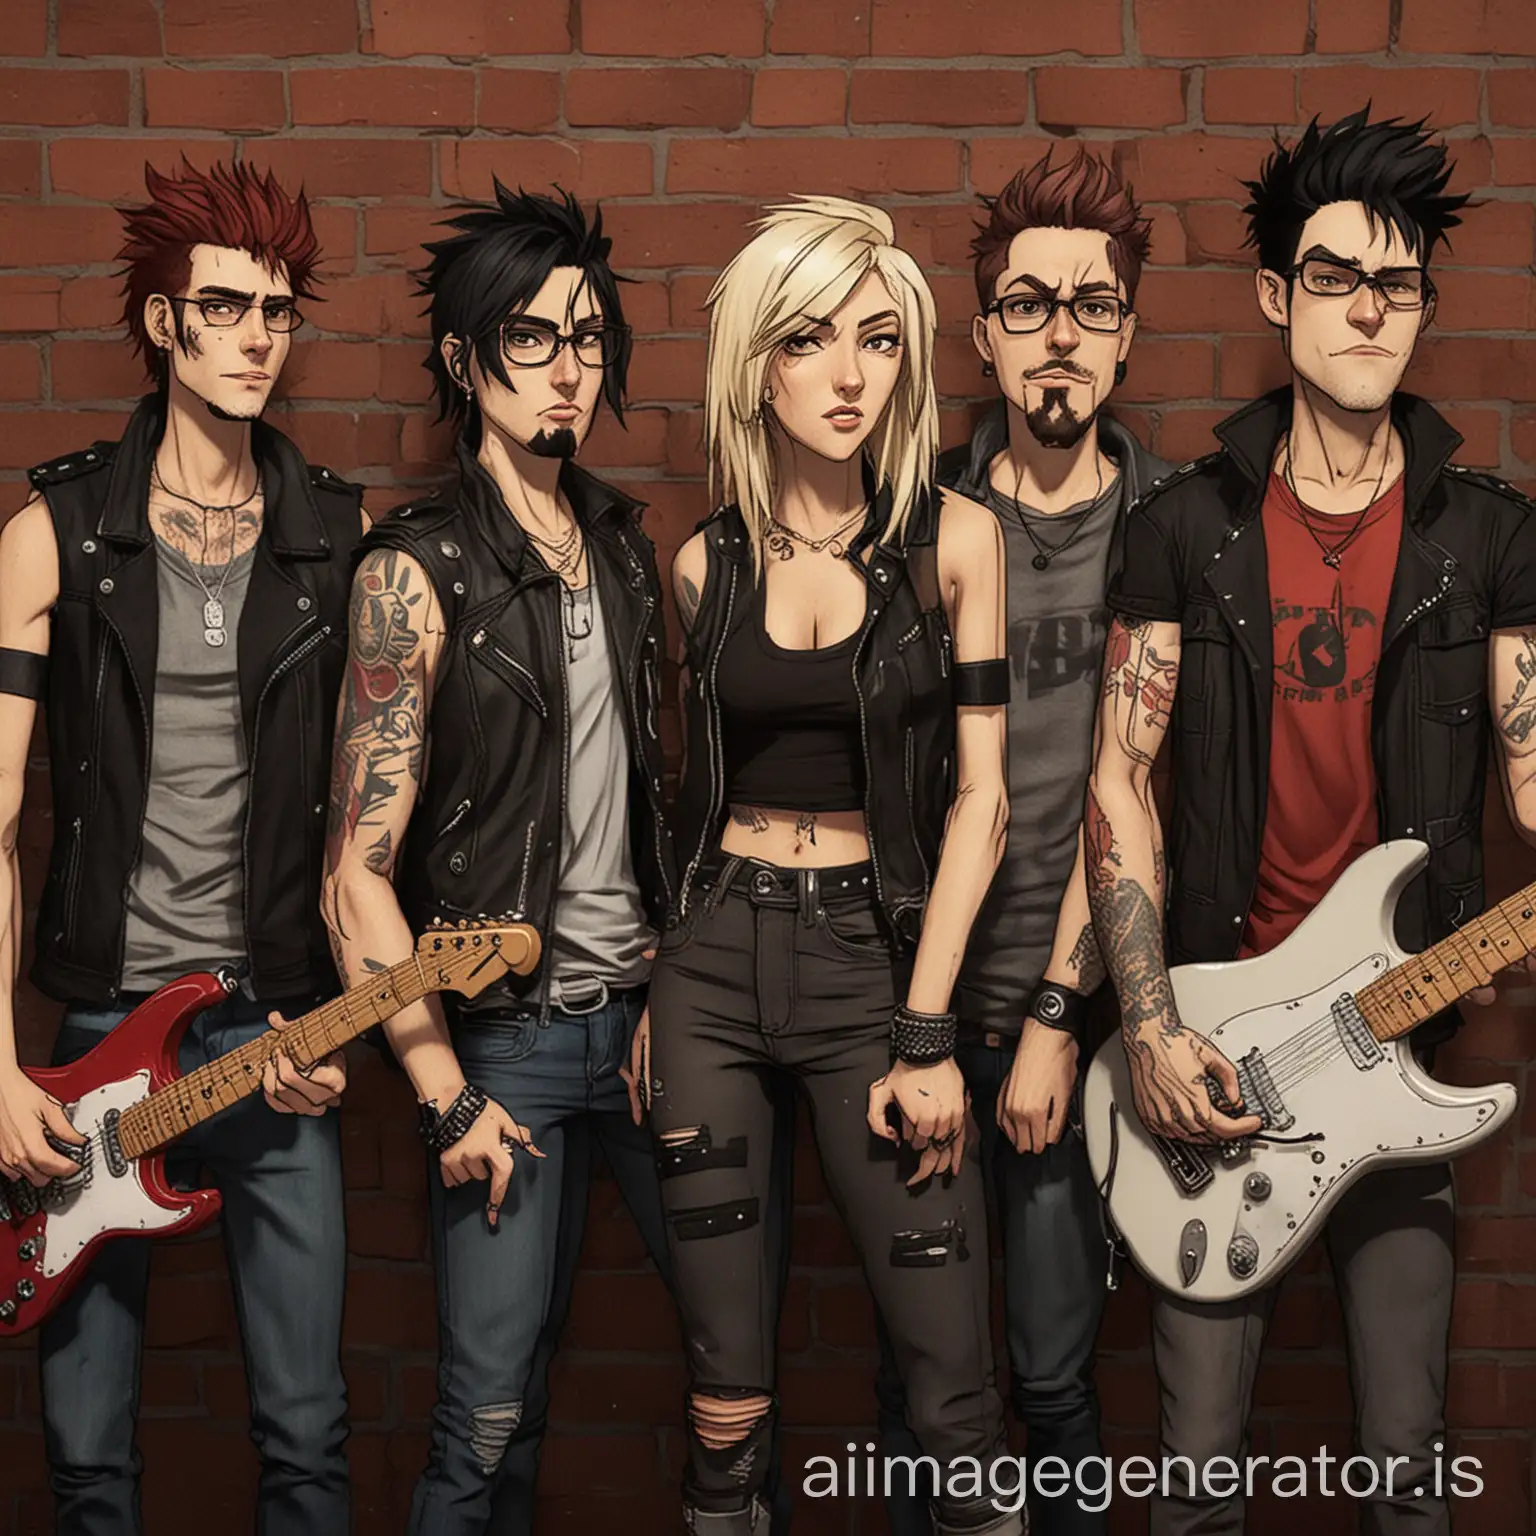 edgy adult animated 30 something modern rock band with swagger female lead singer and four guys in band.